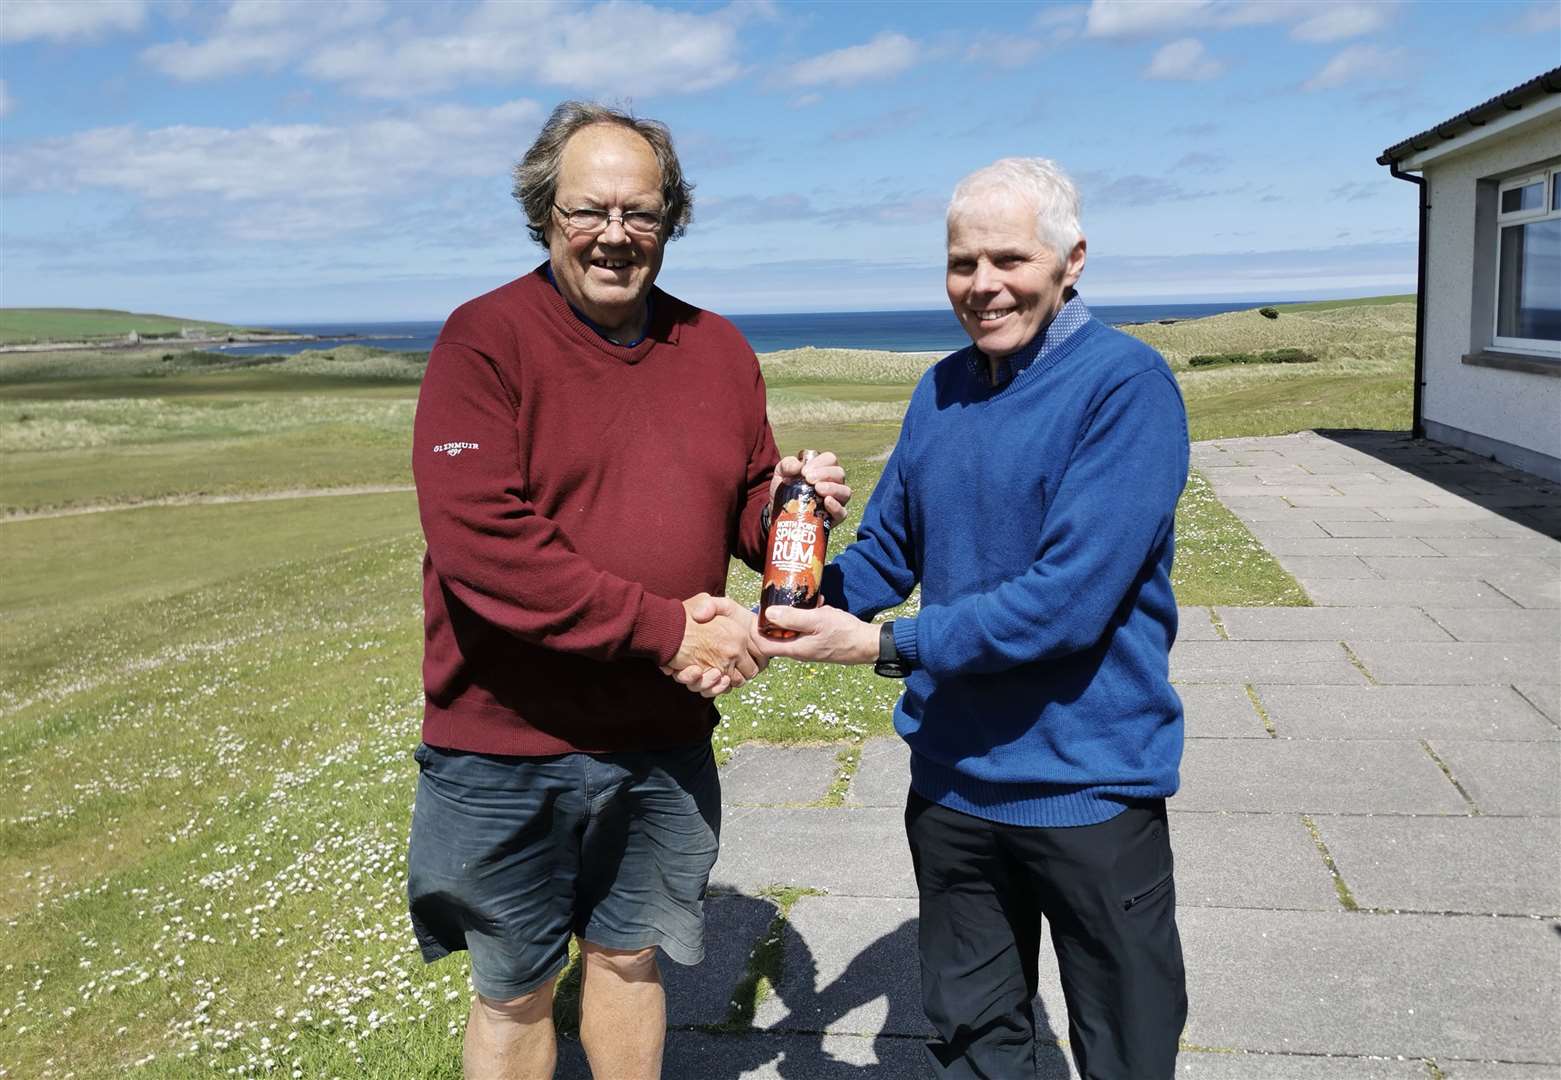 Mike Halliday (left) receives a bottle of North Point spiced rum from Sandy Chisholm for winning nearest the pin in the latest round of the senior Stableford competition at Reay.